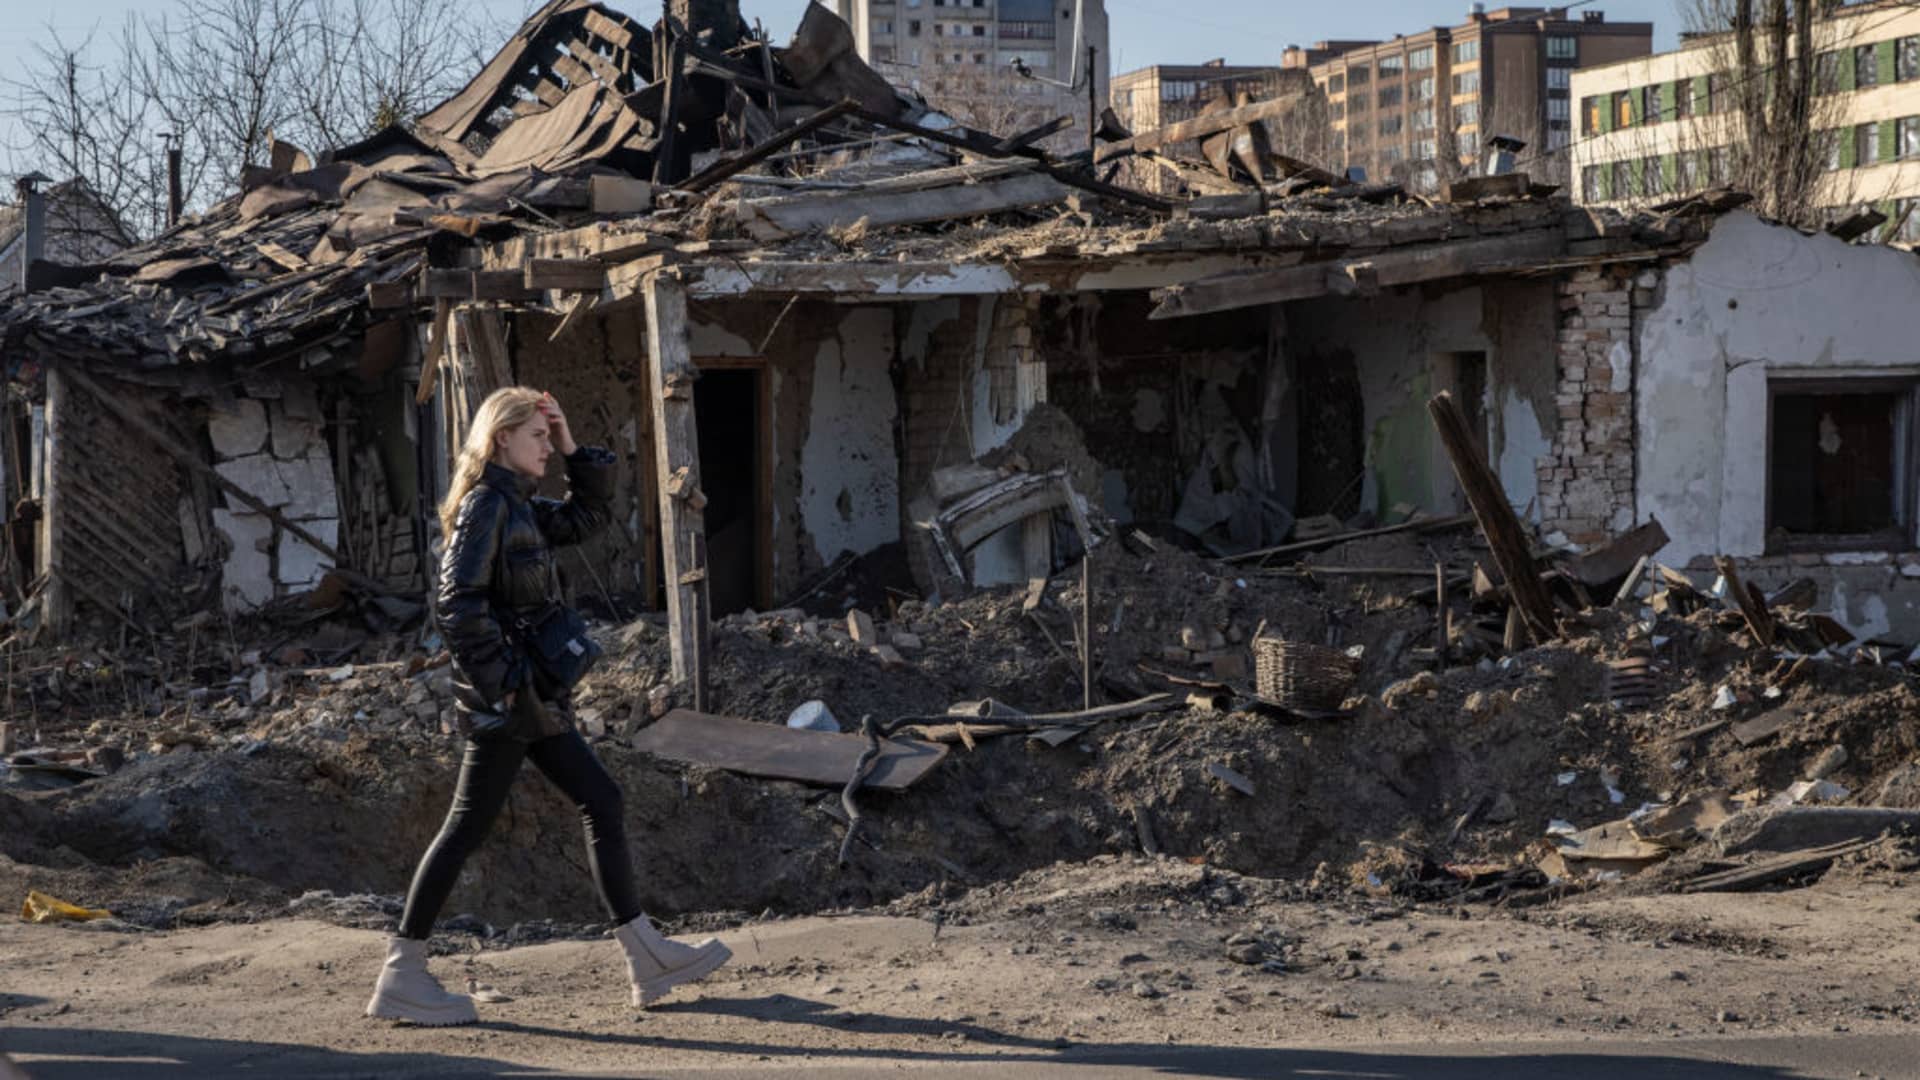 A woman walks past a rocket crater and a destroyed home destroyed that was struck in a recent Russian attack on March 20, 2022 in Zhytomyr, Ukraine.